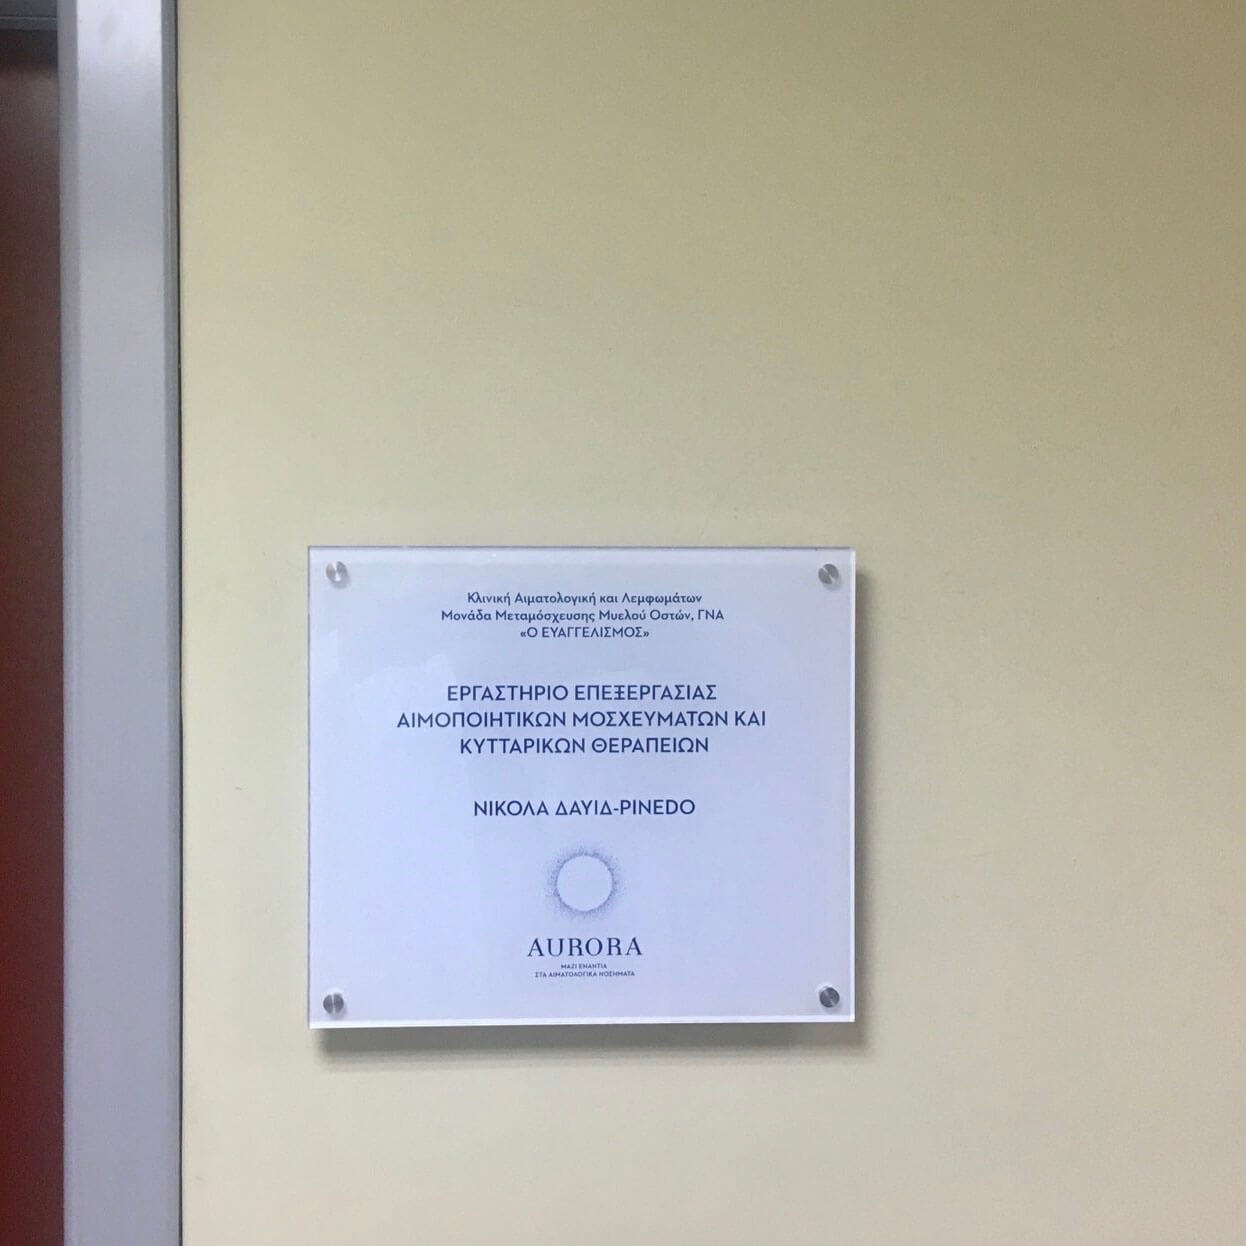 Naming of the “Nicola David-Pinedo” Hematopoietic Graft Processing and Cellular Therapy Laboratory at the “EVANGELISMOS” General Hospital